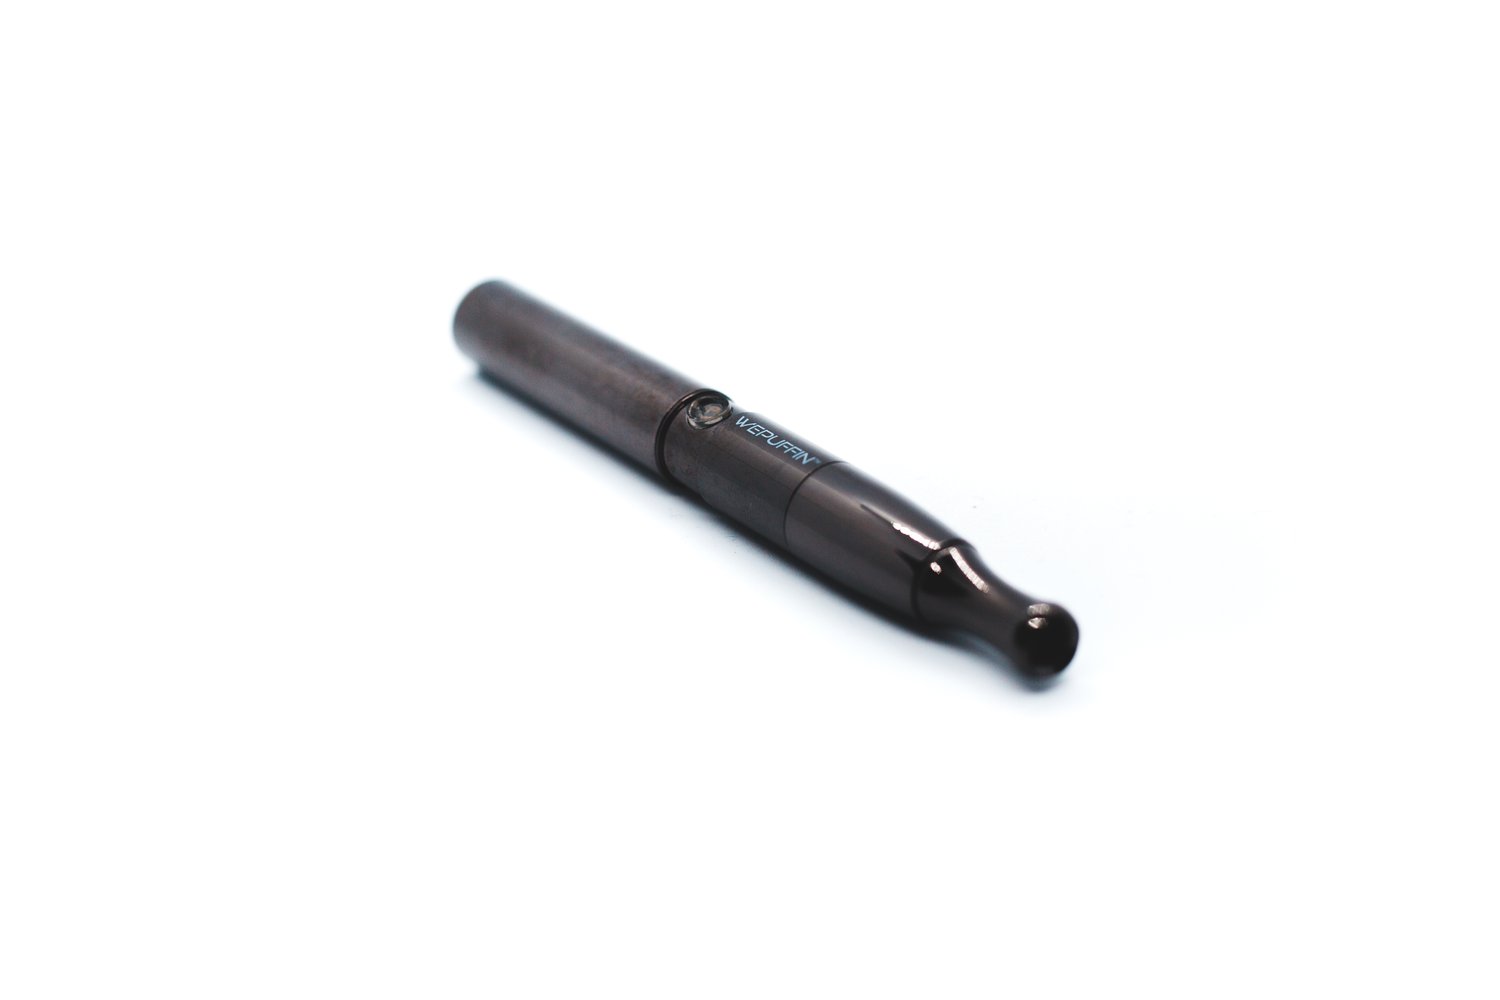 Image of RDF Extract Vaporizer Pen by WePuffin